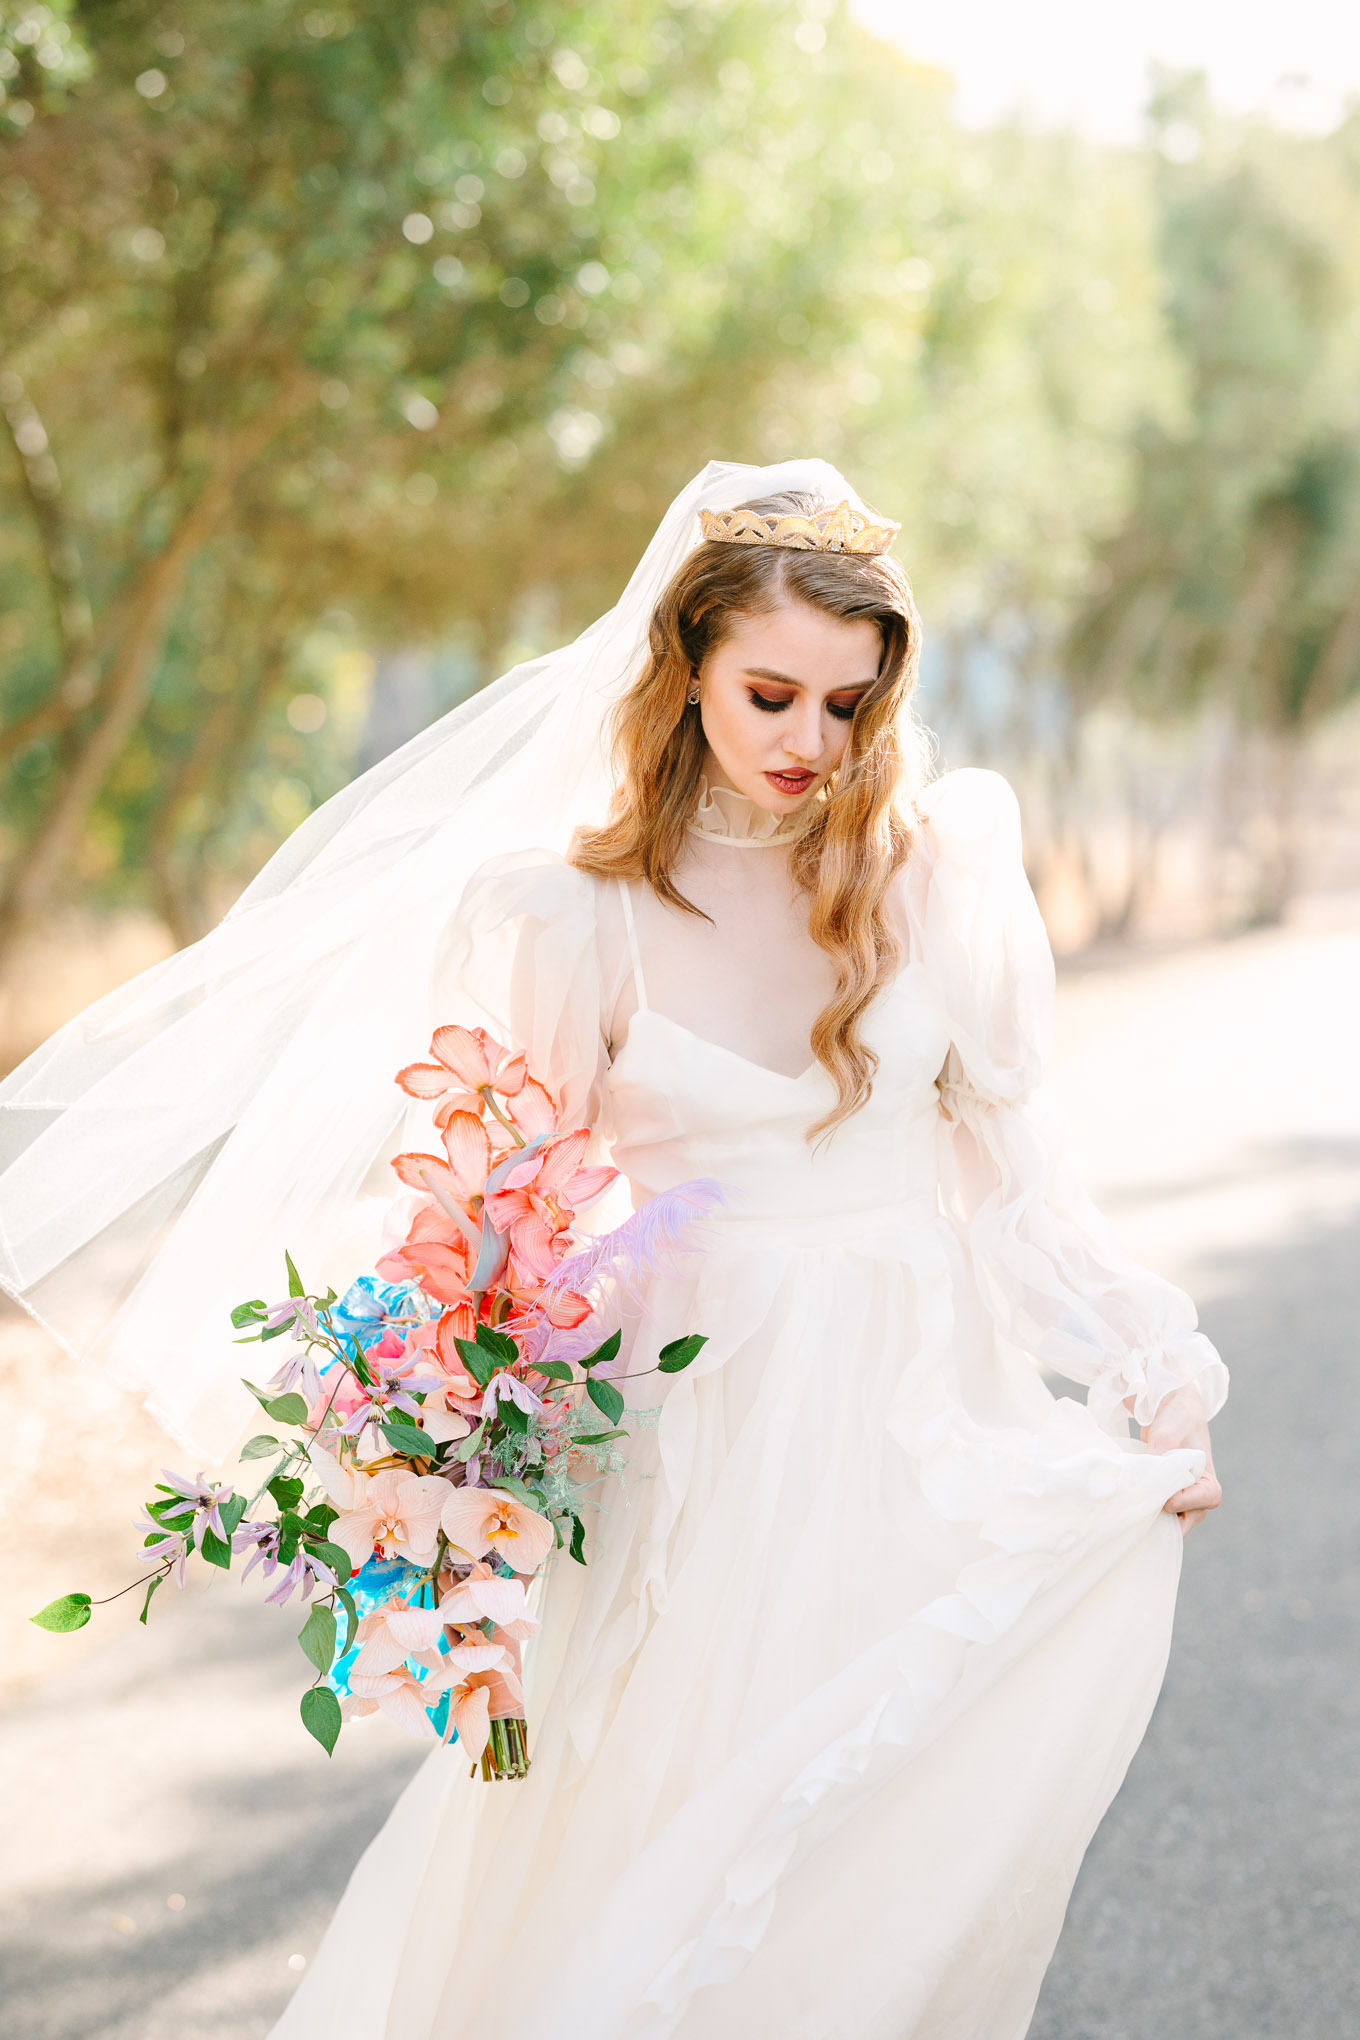 Bride Allison Harvard wearing Odylyne The Ceremony Caspian gown | Colorful and quirky wedding at Higuera Ranch in San Luis Obispo | #sanluisobispowedding #californiawedding #higueraranch #madonnainn   Source: Mary Costa Photography | Los Angeles